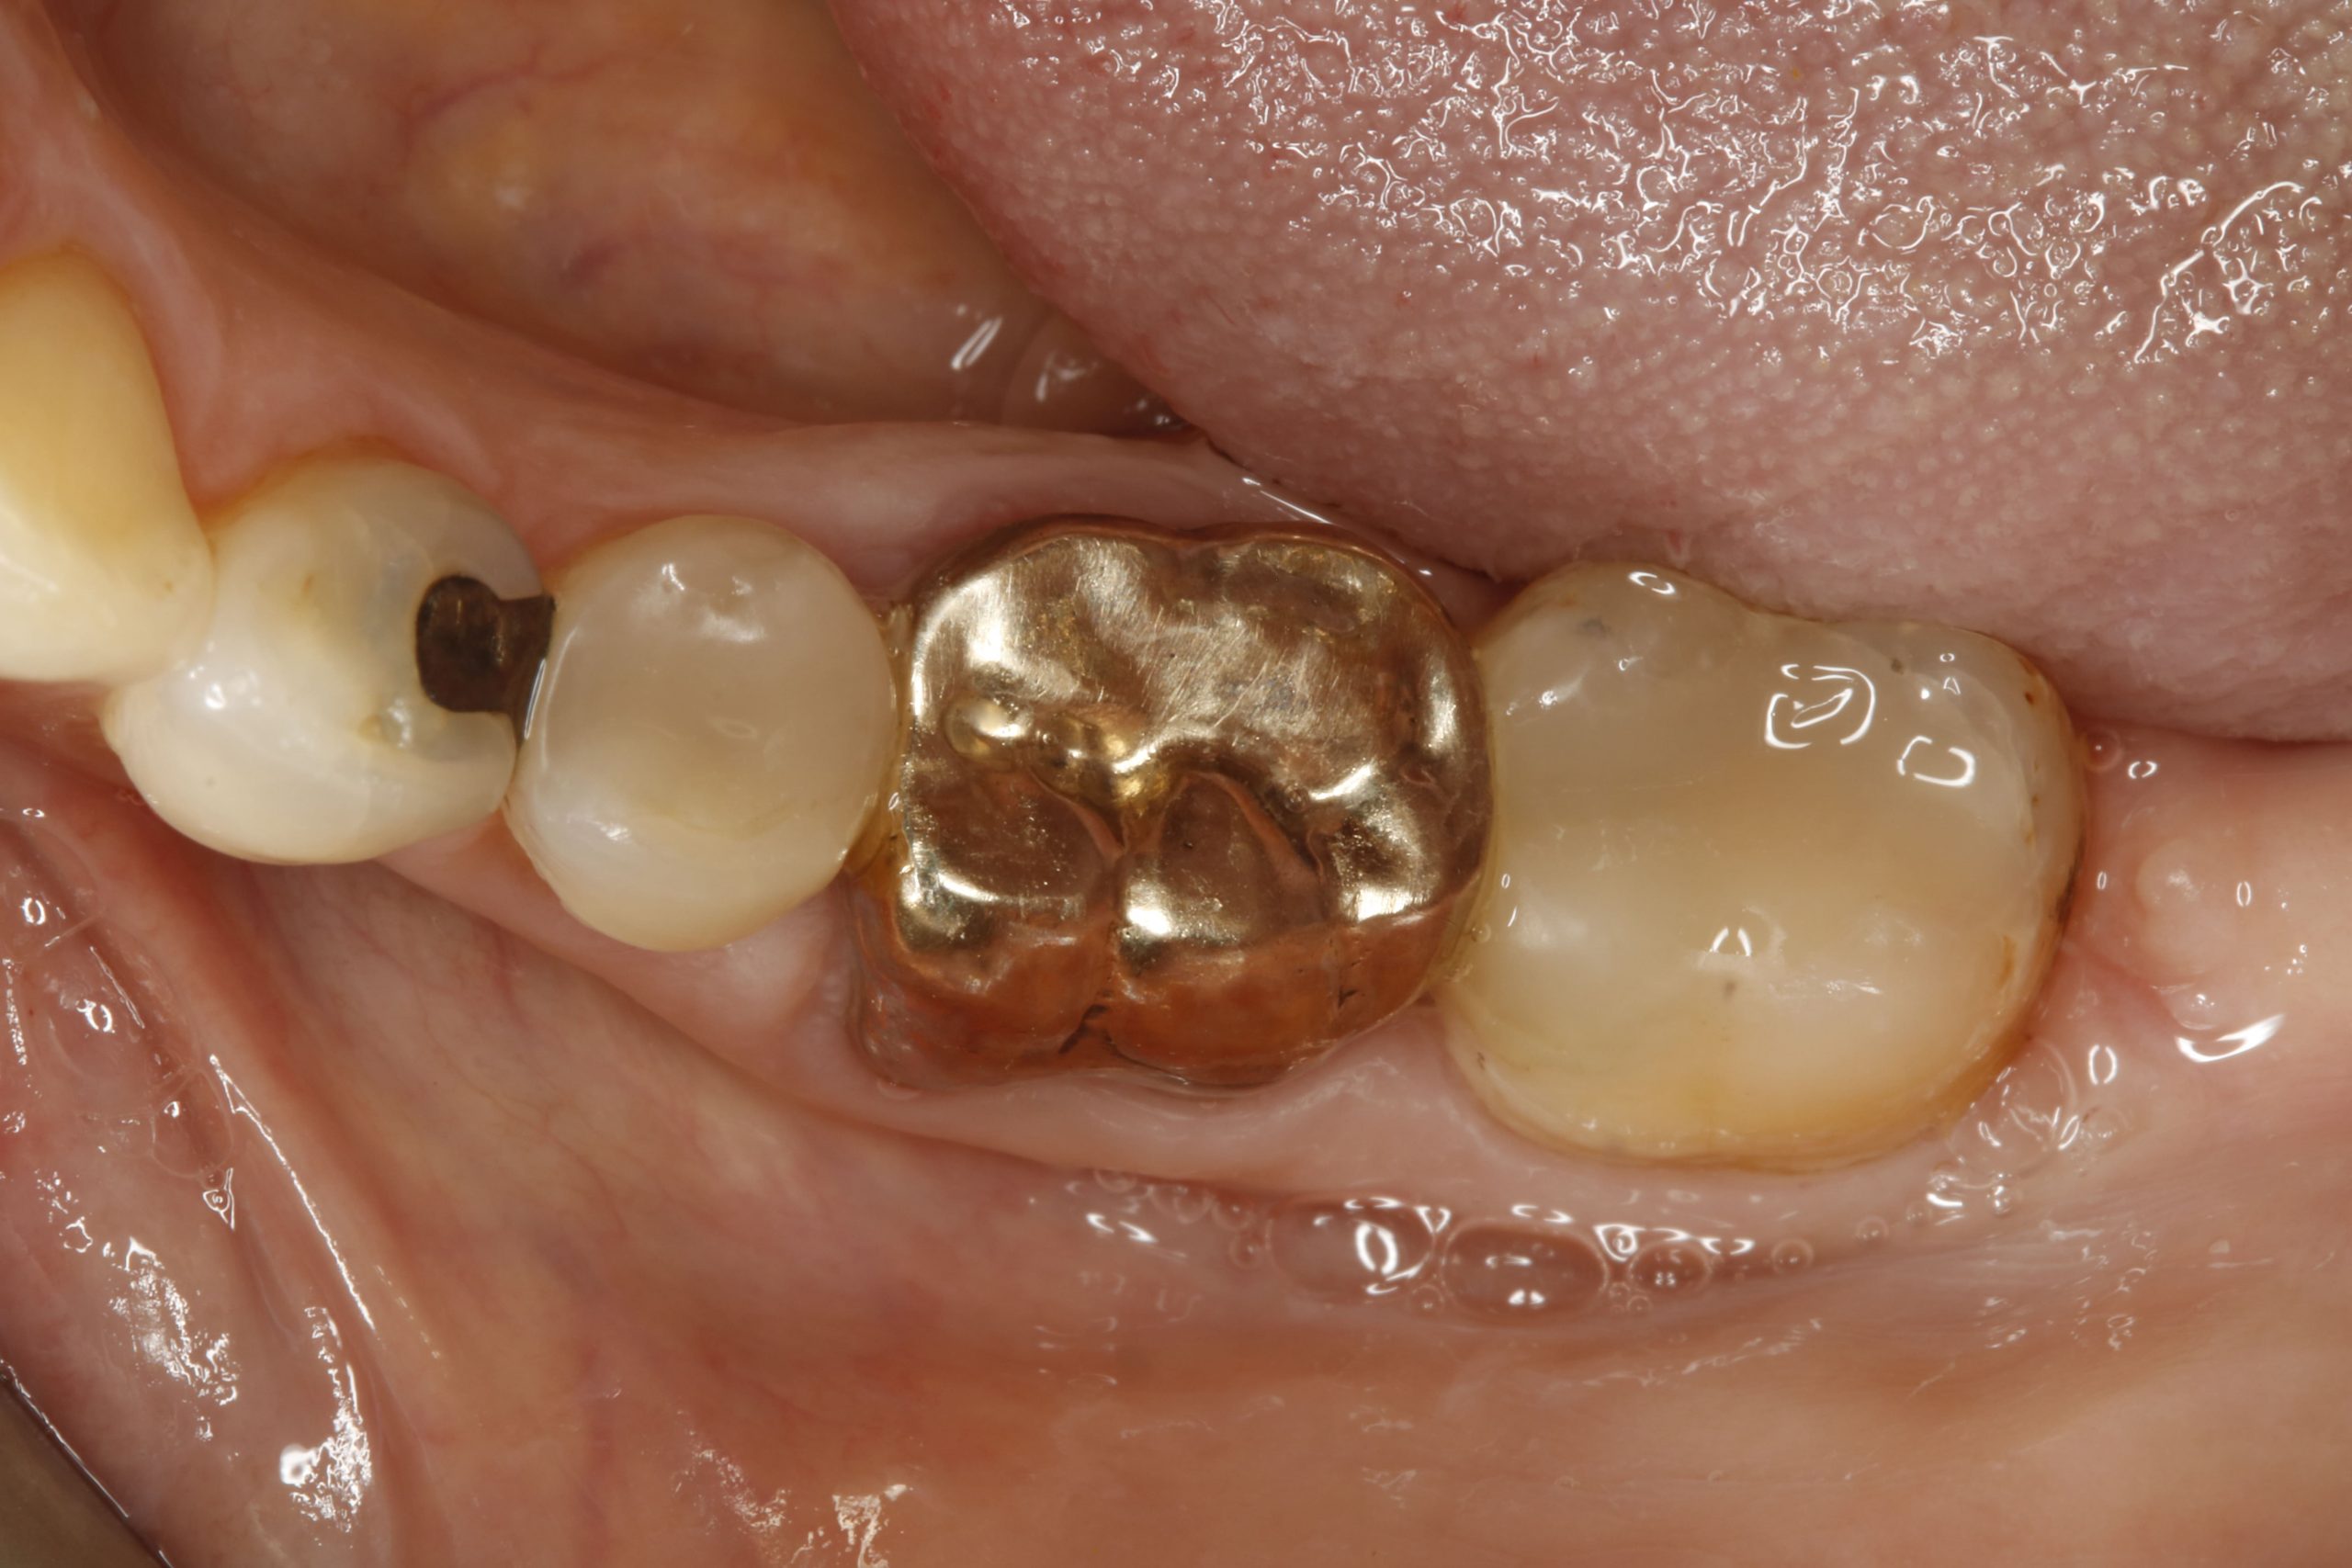 Lower left after, 1 gold crown, 2 white fillings